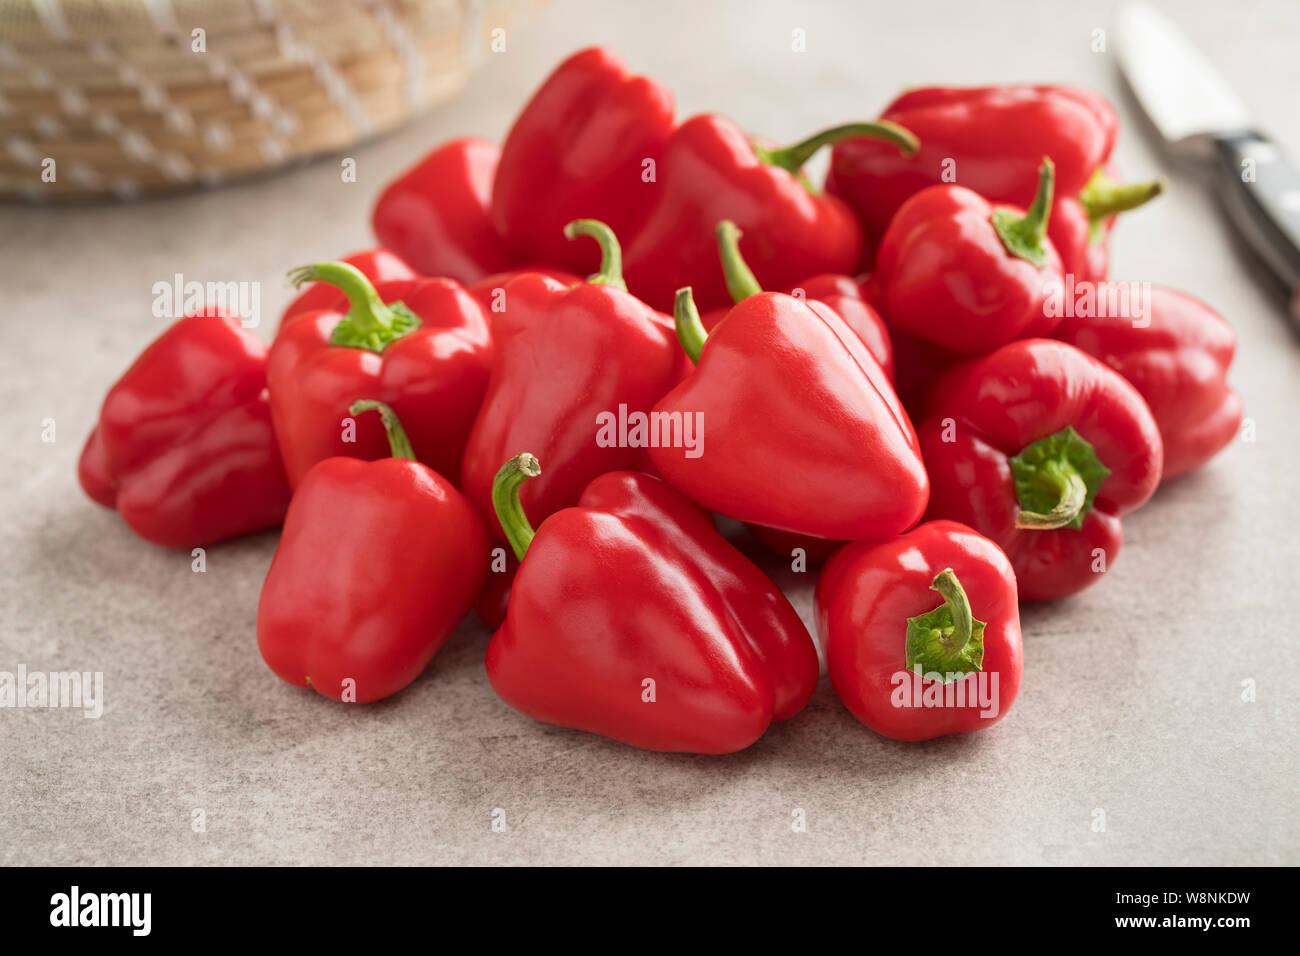 Heap of fresh raw mini red bell peppers ready to cook Stock Photo